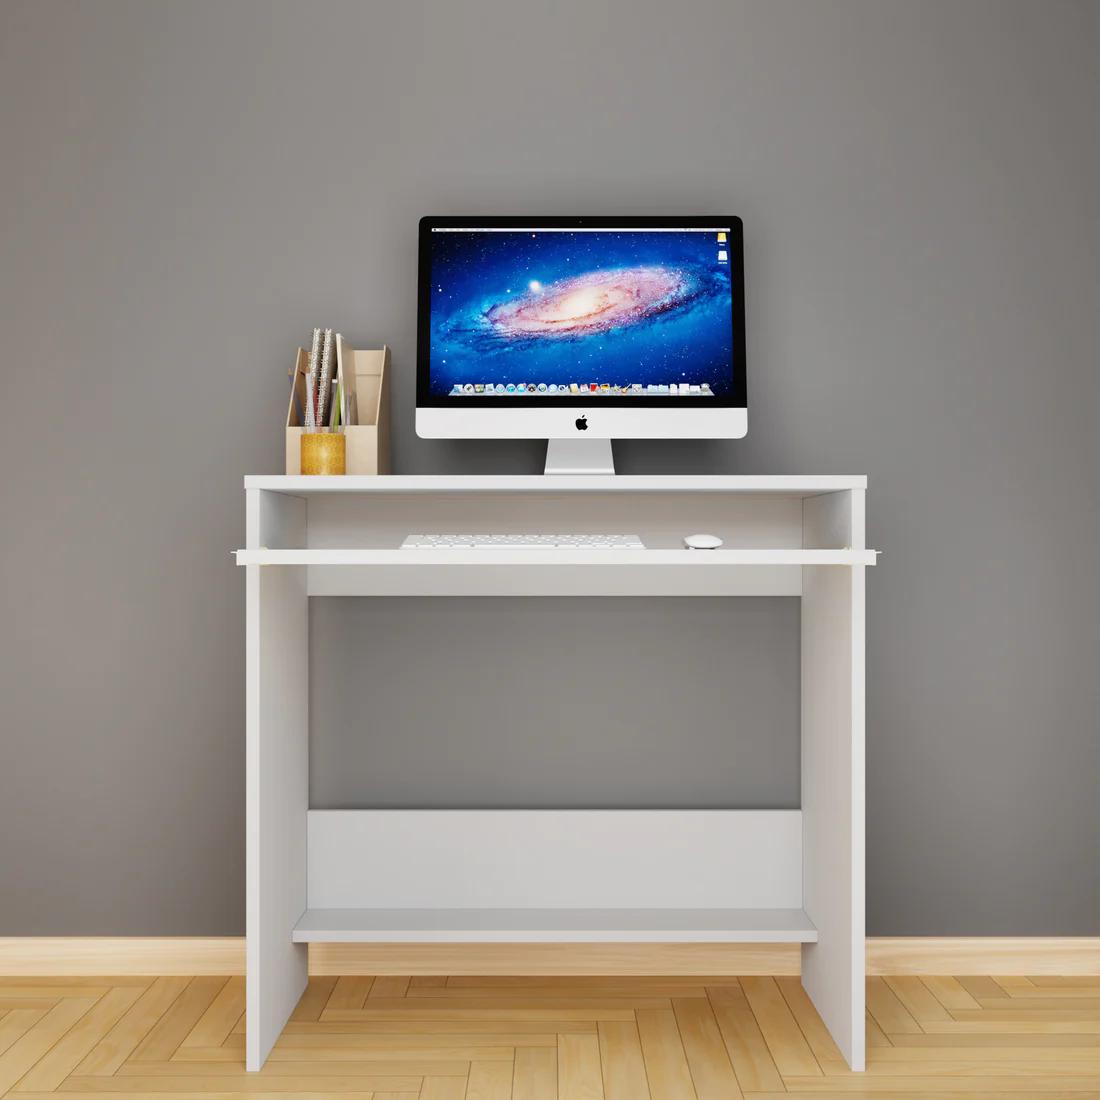 Rybnik Engineered Wood Computer Table in White Color